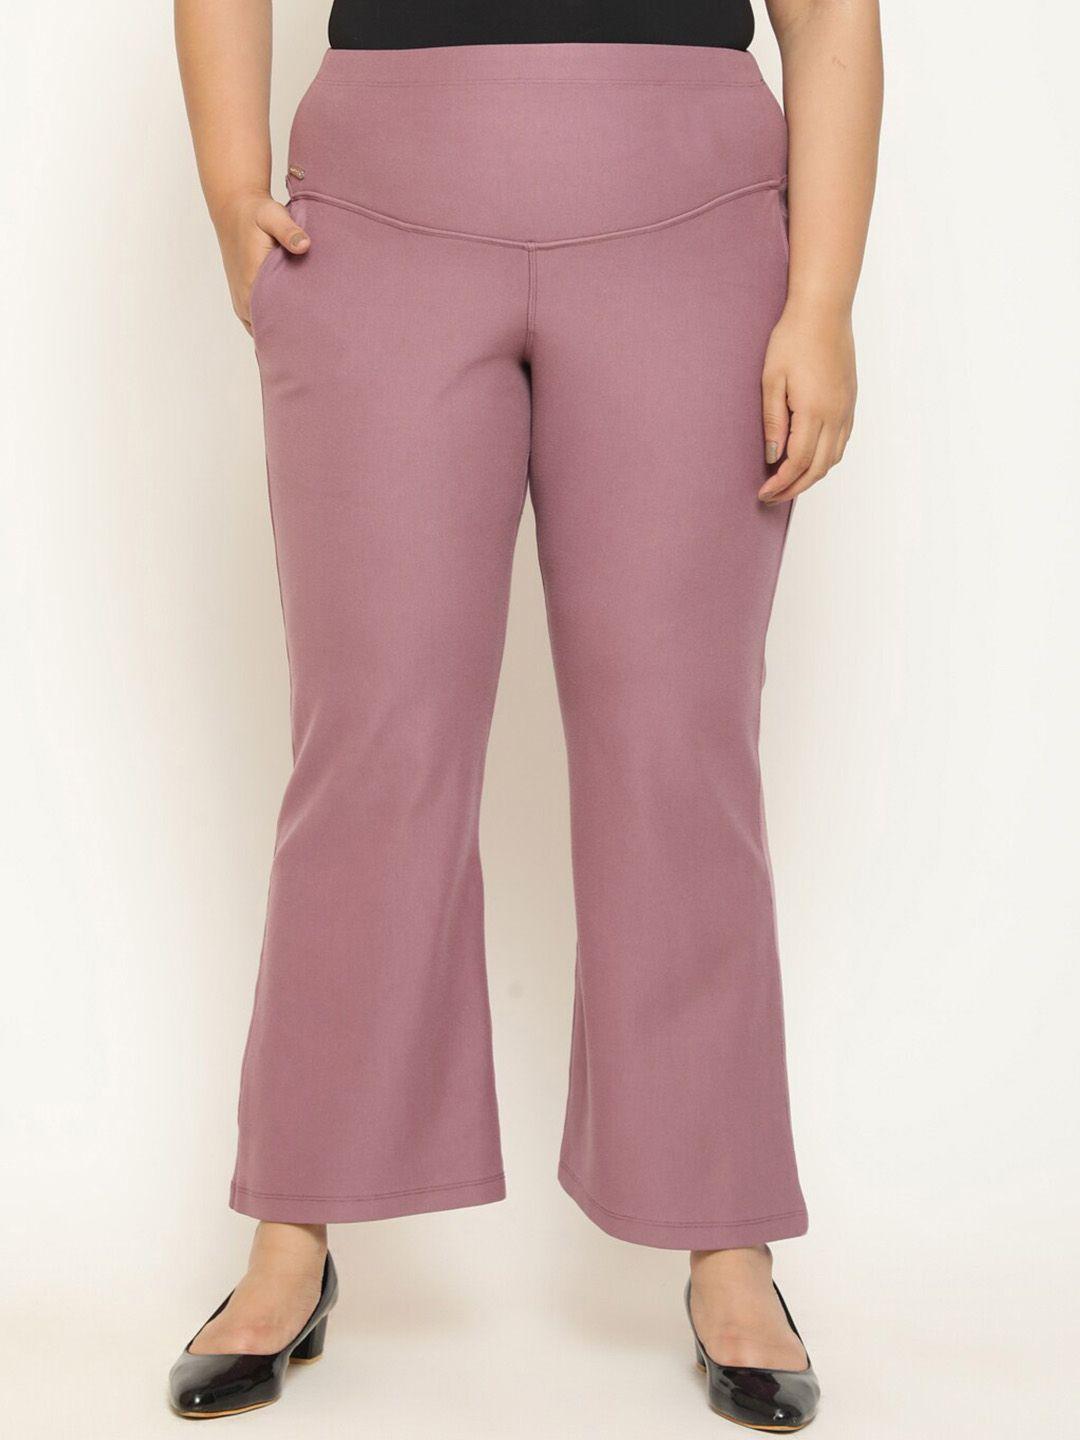 amydus-women-plus-size-flared-high-rise-bootcut-trousers